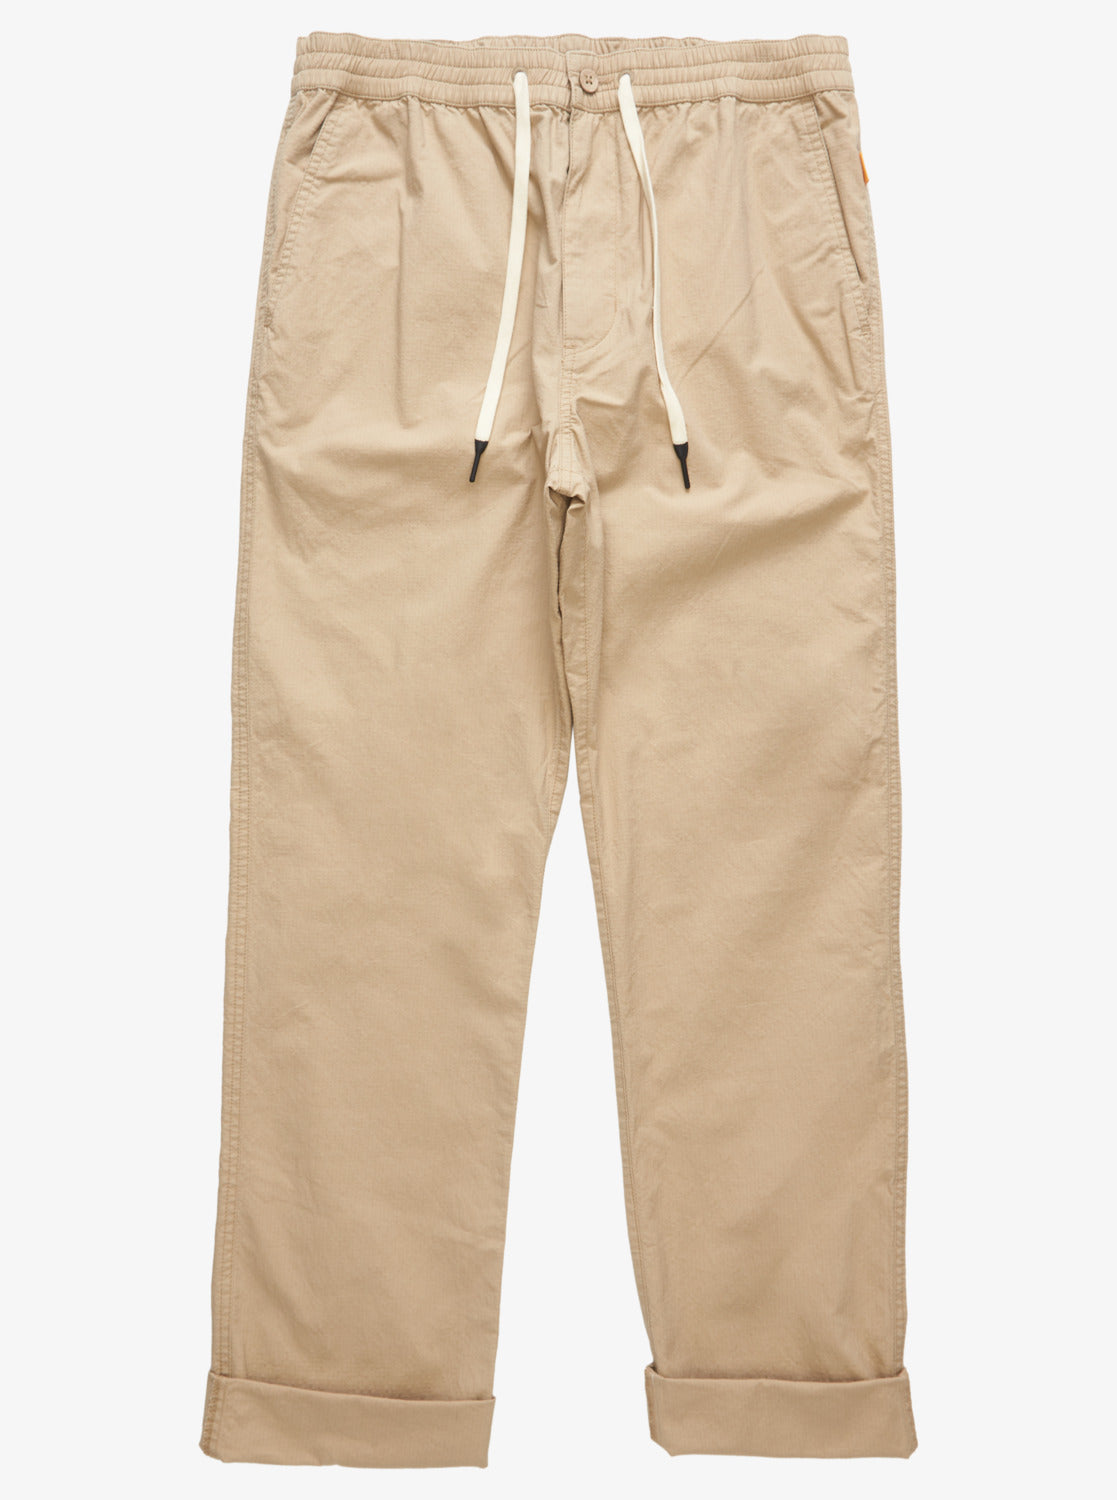 Waterman After Surf Pants - Incense